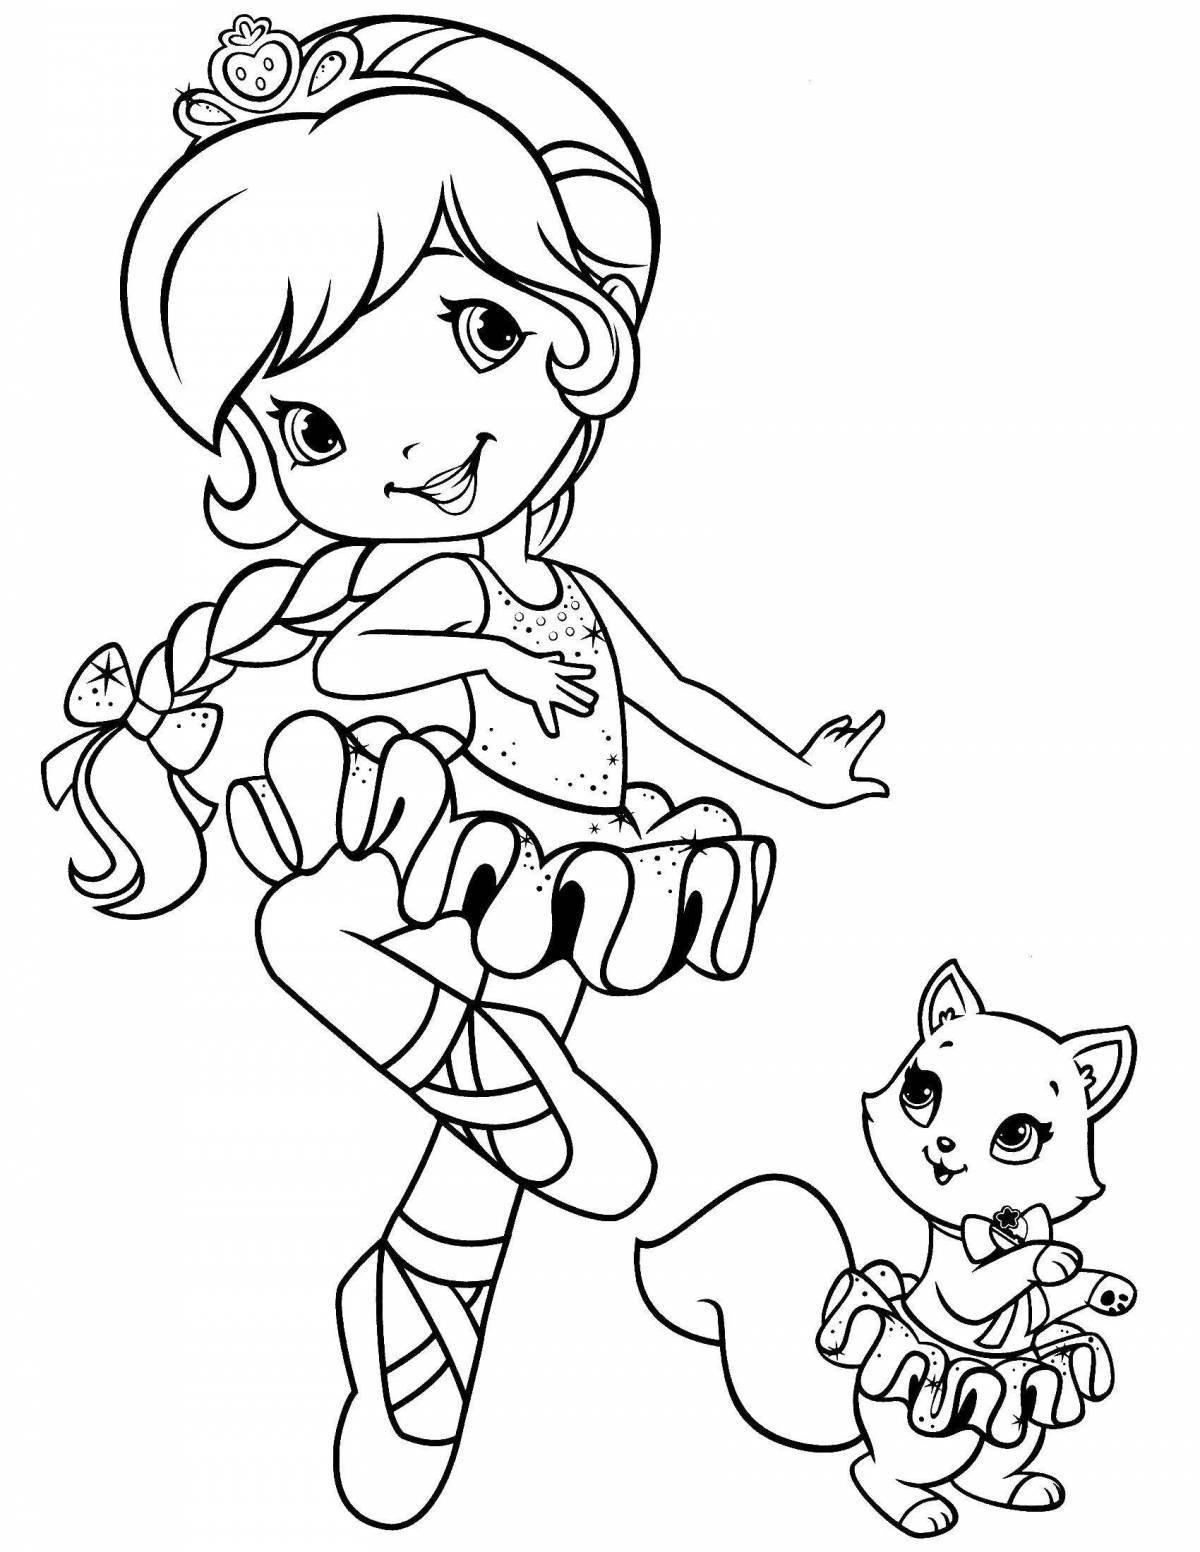 Coloring page energetic crimson girl